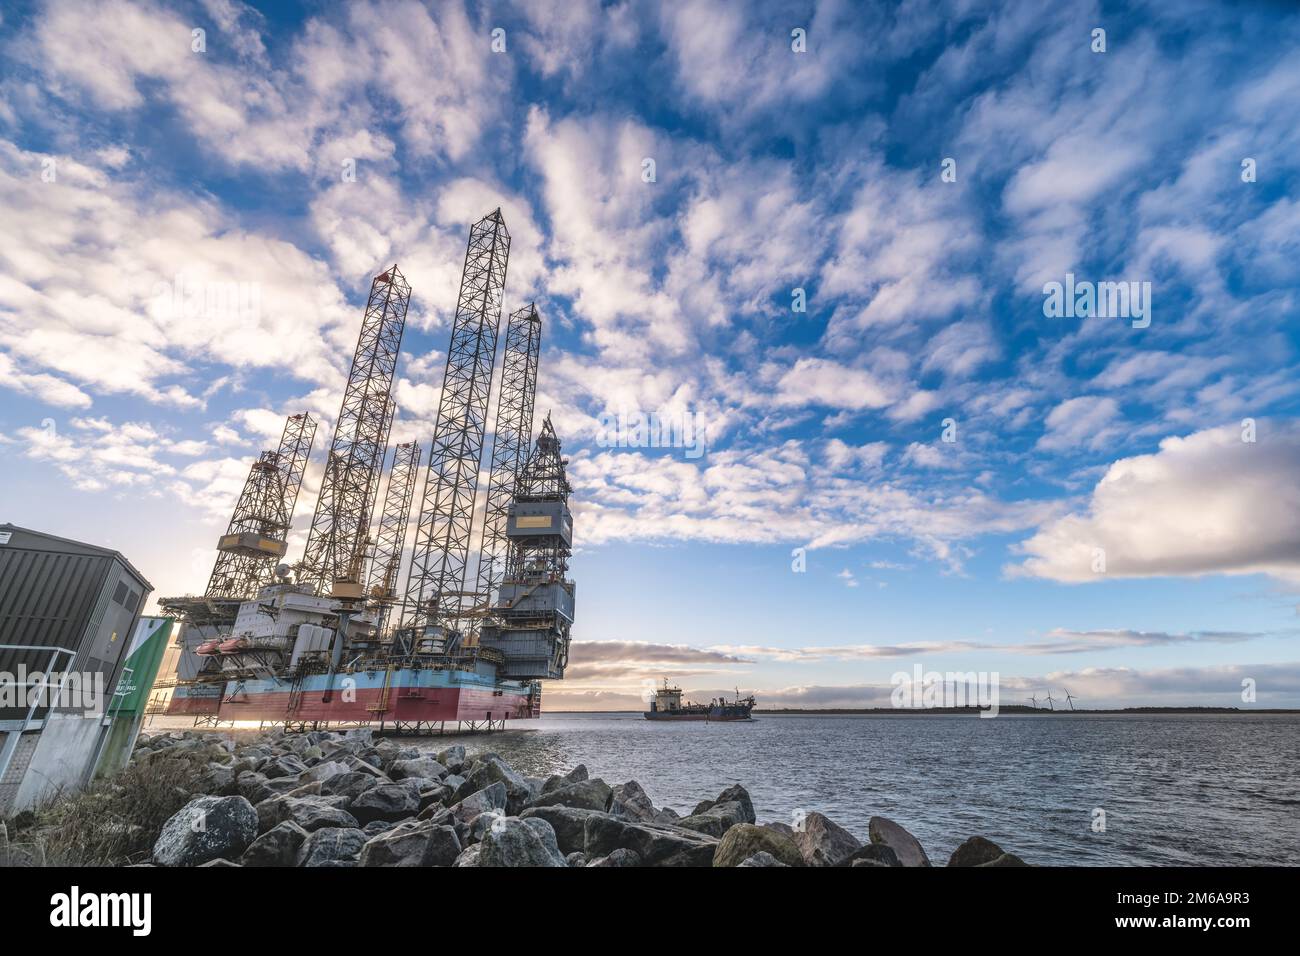 Oil rigs in Esbjerg harbor at the North Sea, Denmark Stock Photo